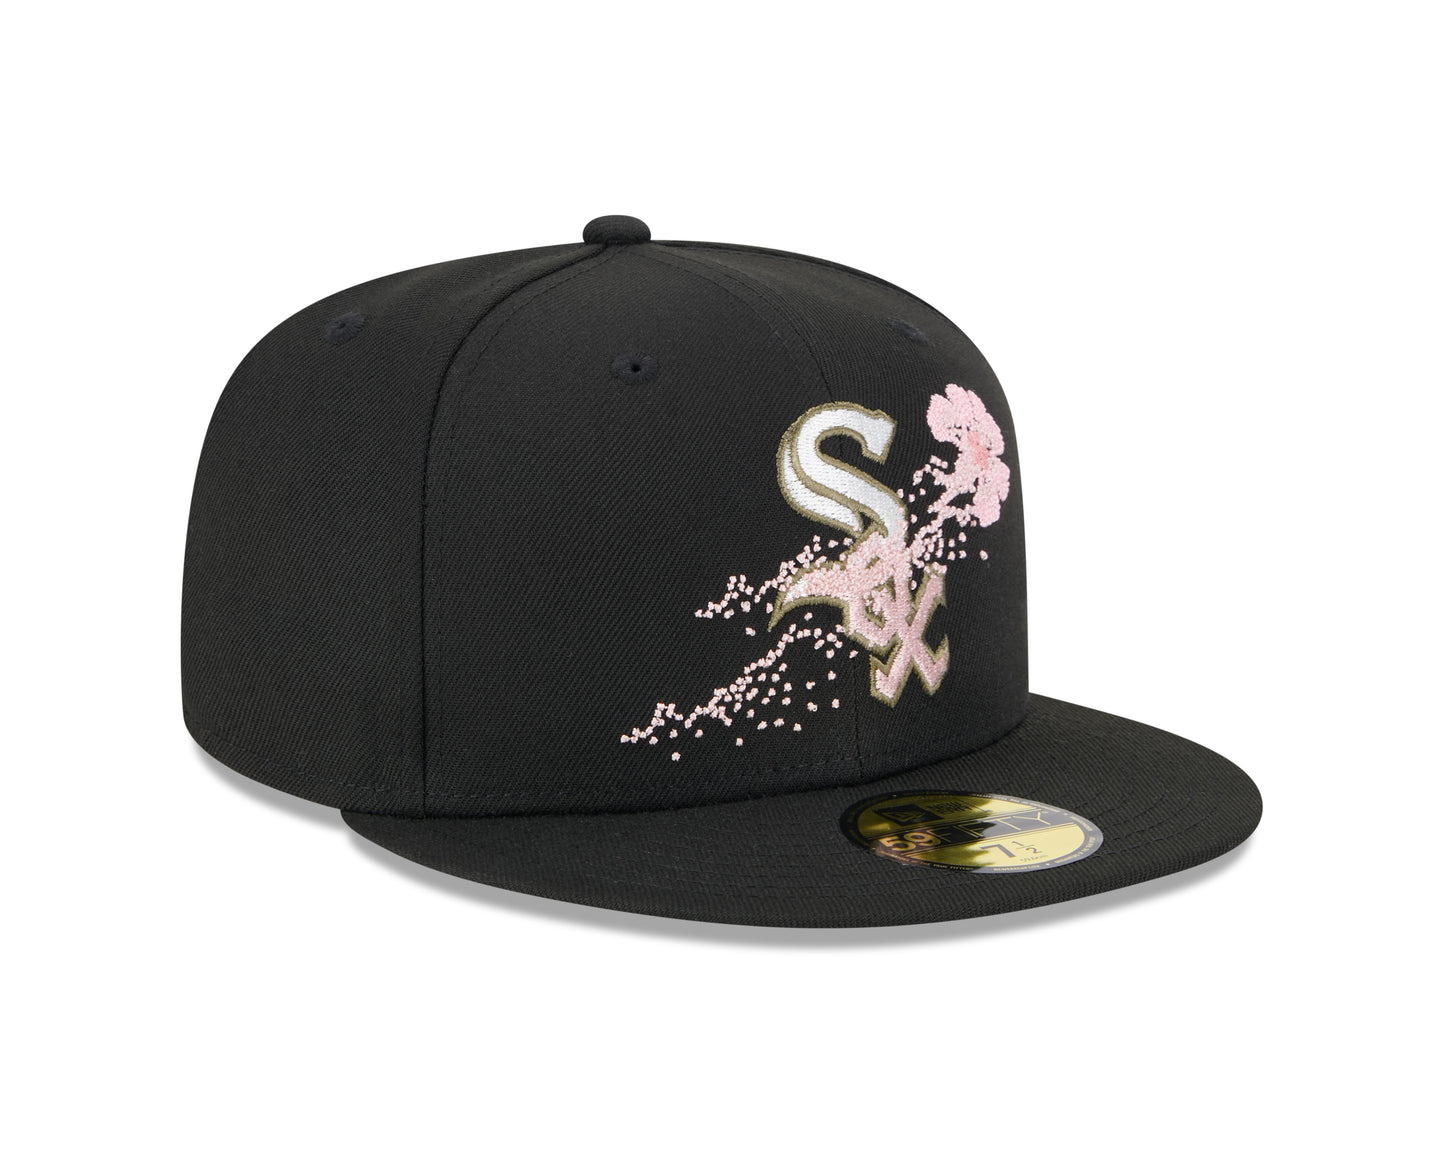 New Era - 59fifty Fitted Cap - Chicago White Sox - DOTTED FLORAL - Black - Headz Up 